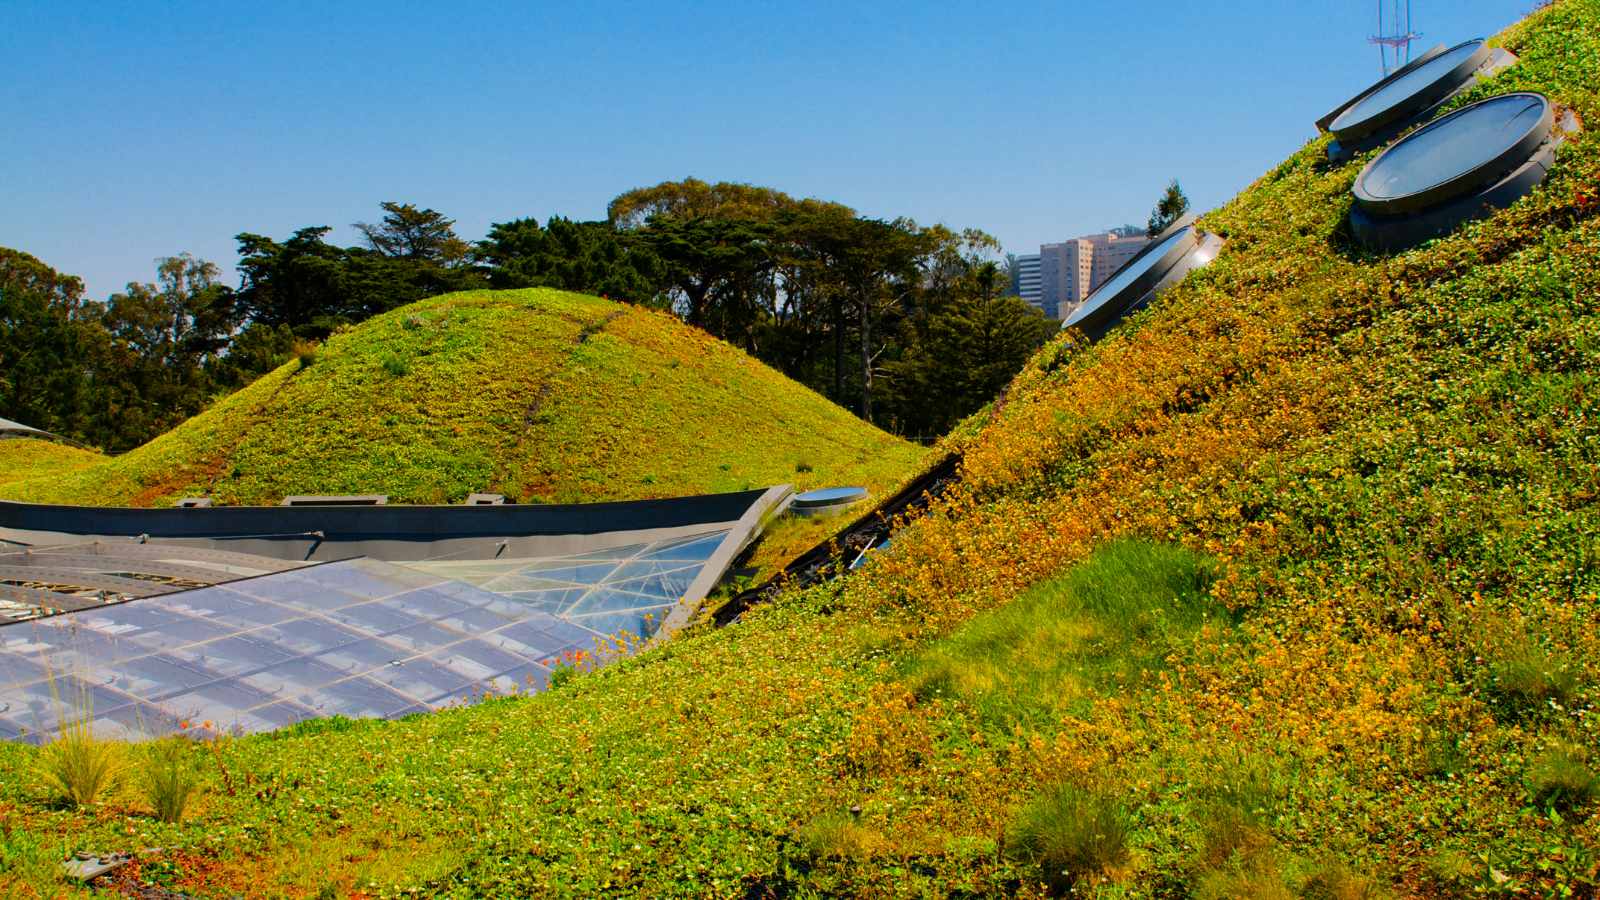 A green roof – a more sustainable construction method to combat waste